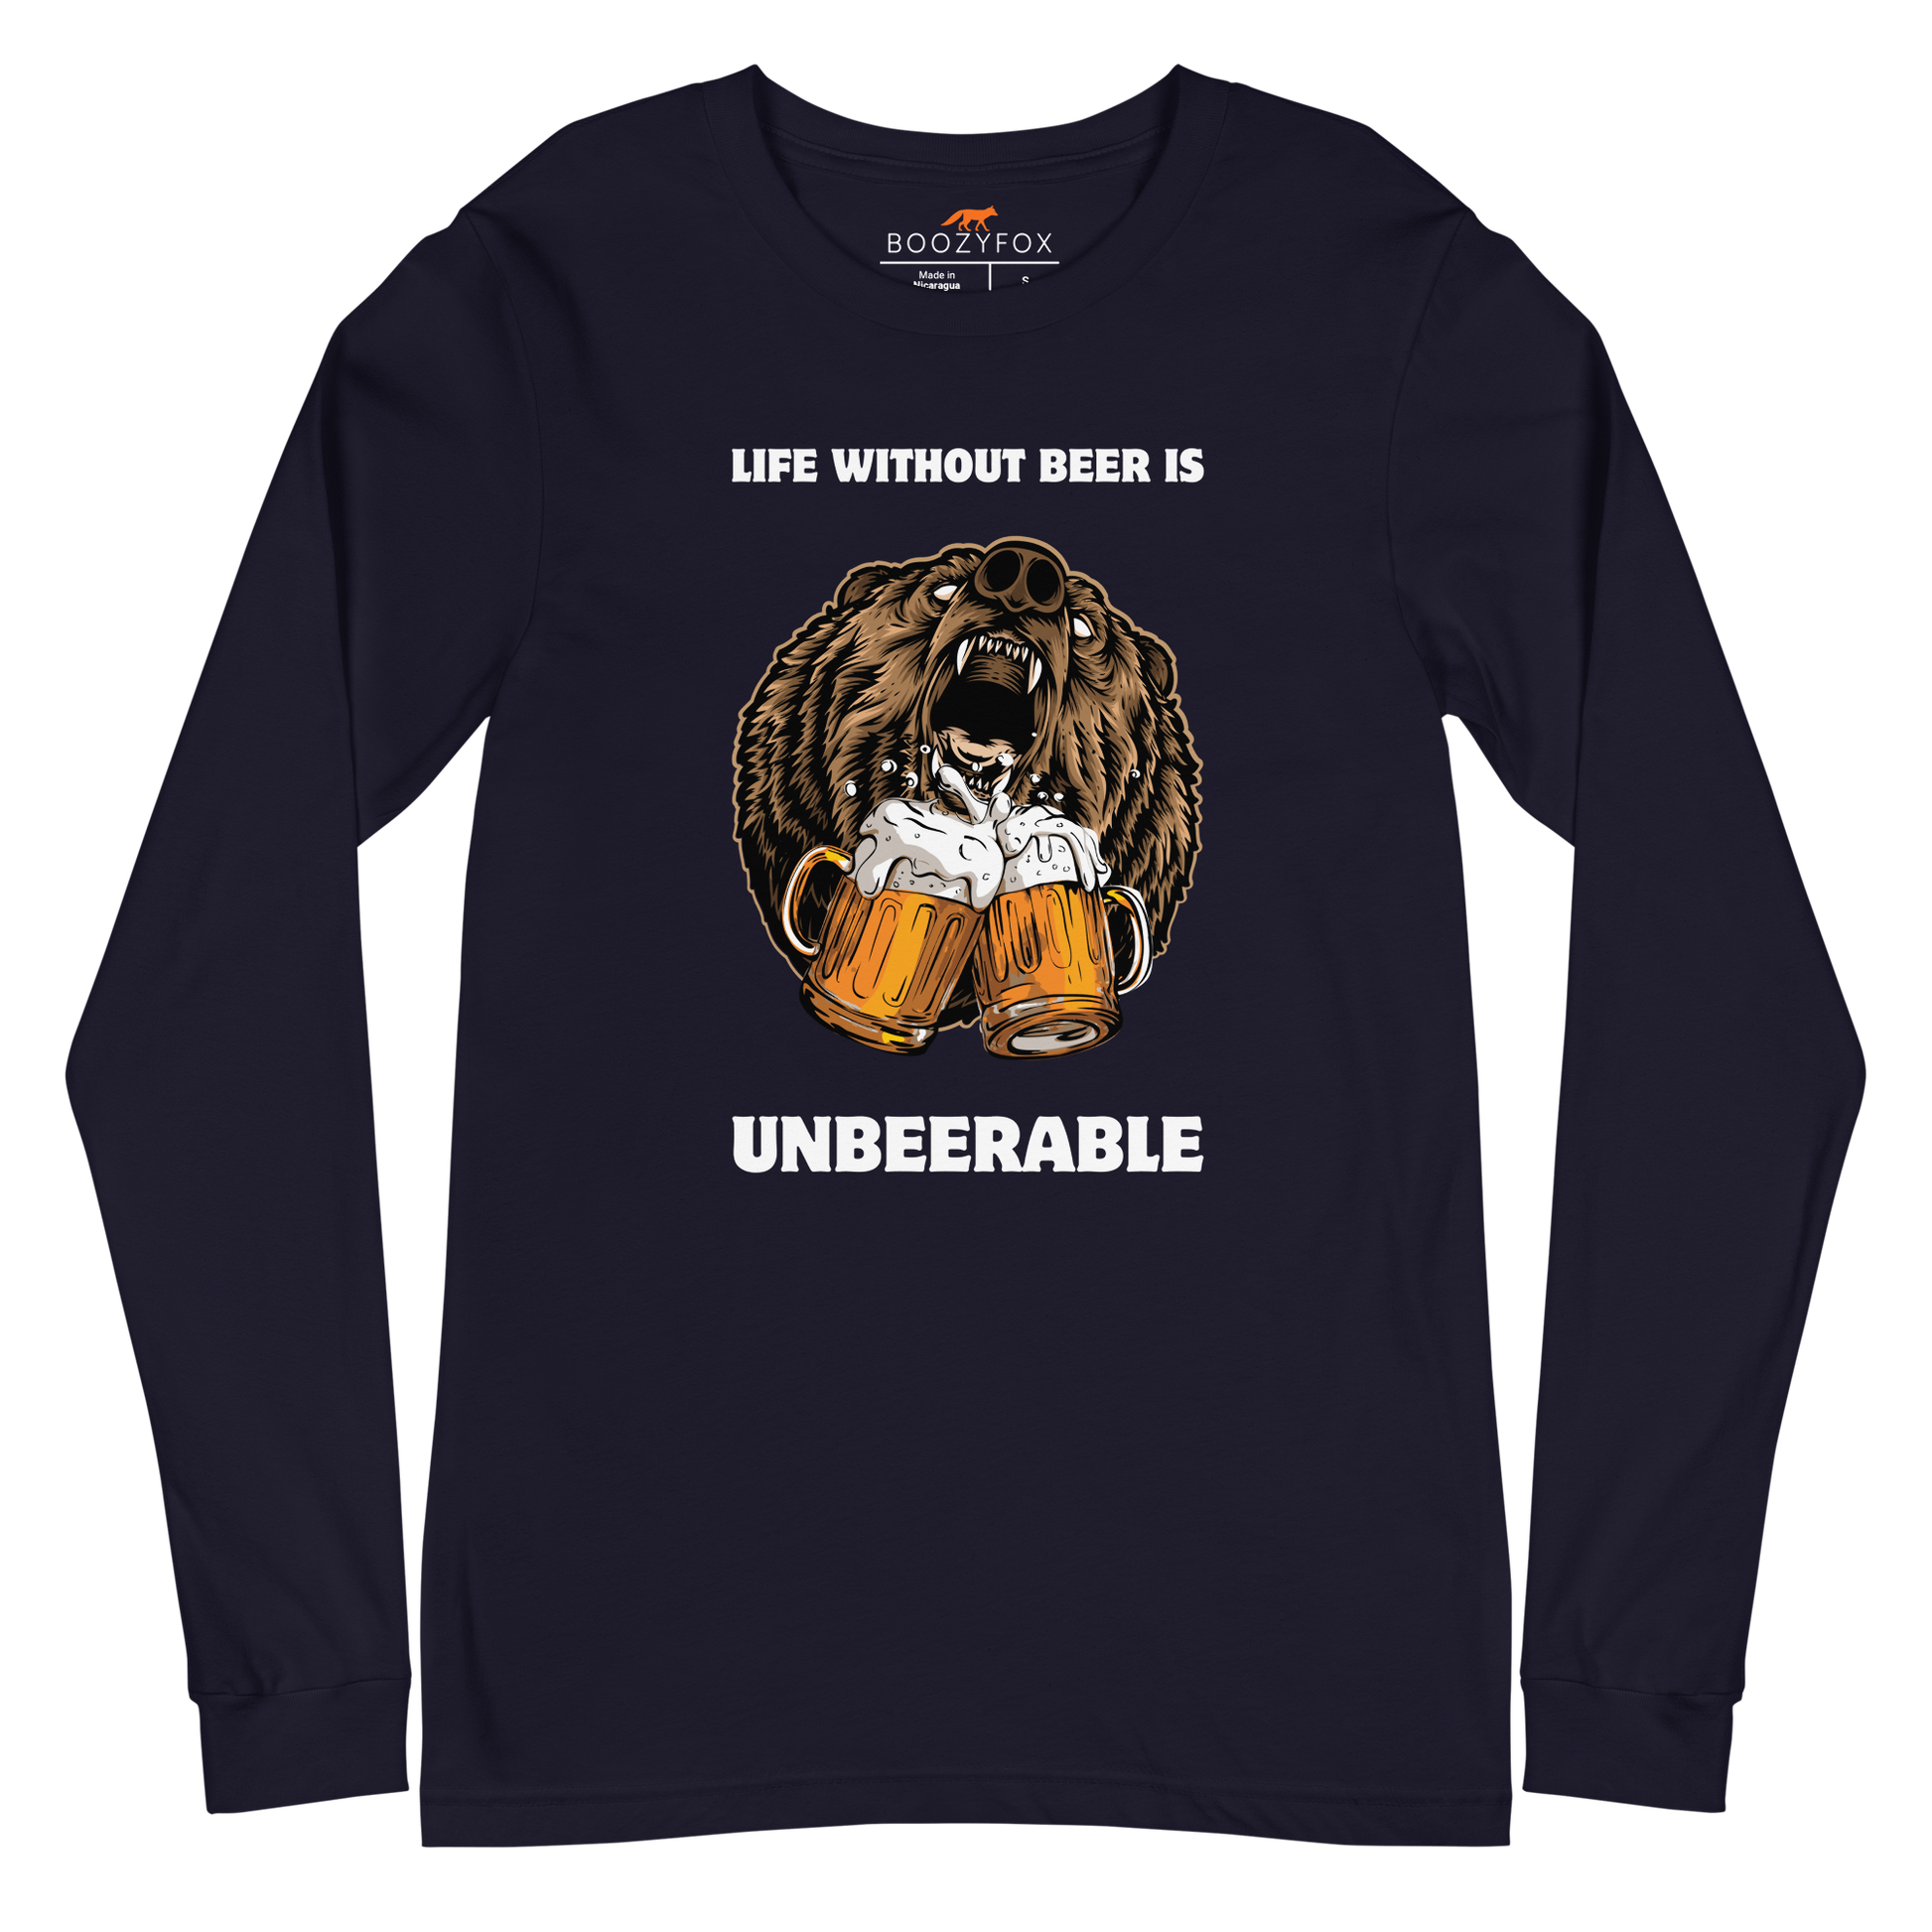 Navy Bear Long Sleeve Tee featuring a Life Without Beer Is Unbeerable graphic on the chest - Funny Bear Long Sleeve Graphic Tees - Boozy Fox